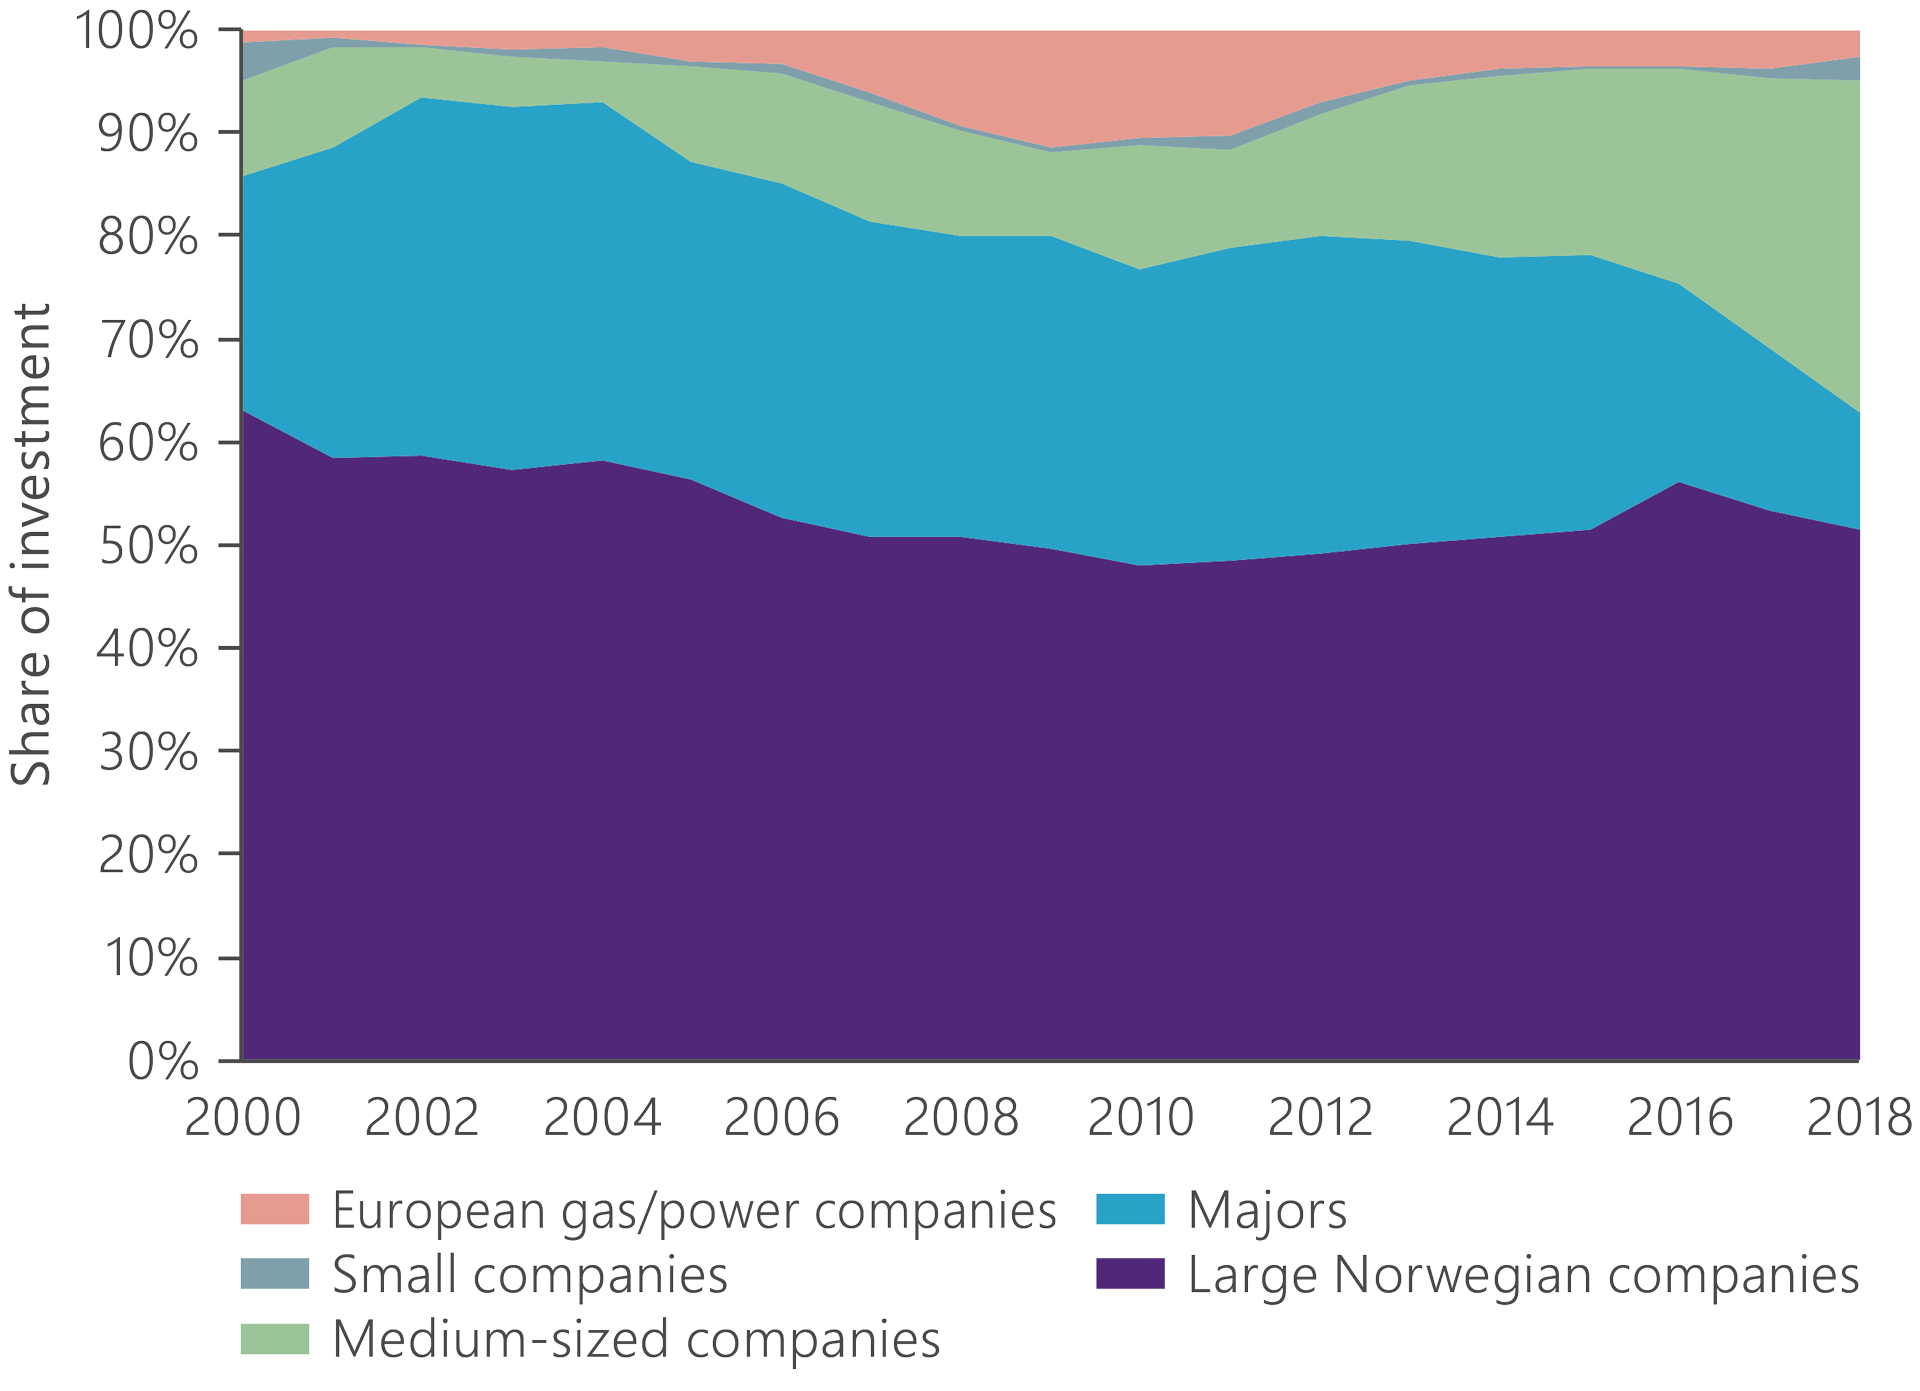 Chart showing share of investment on the NCS by company category.